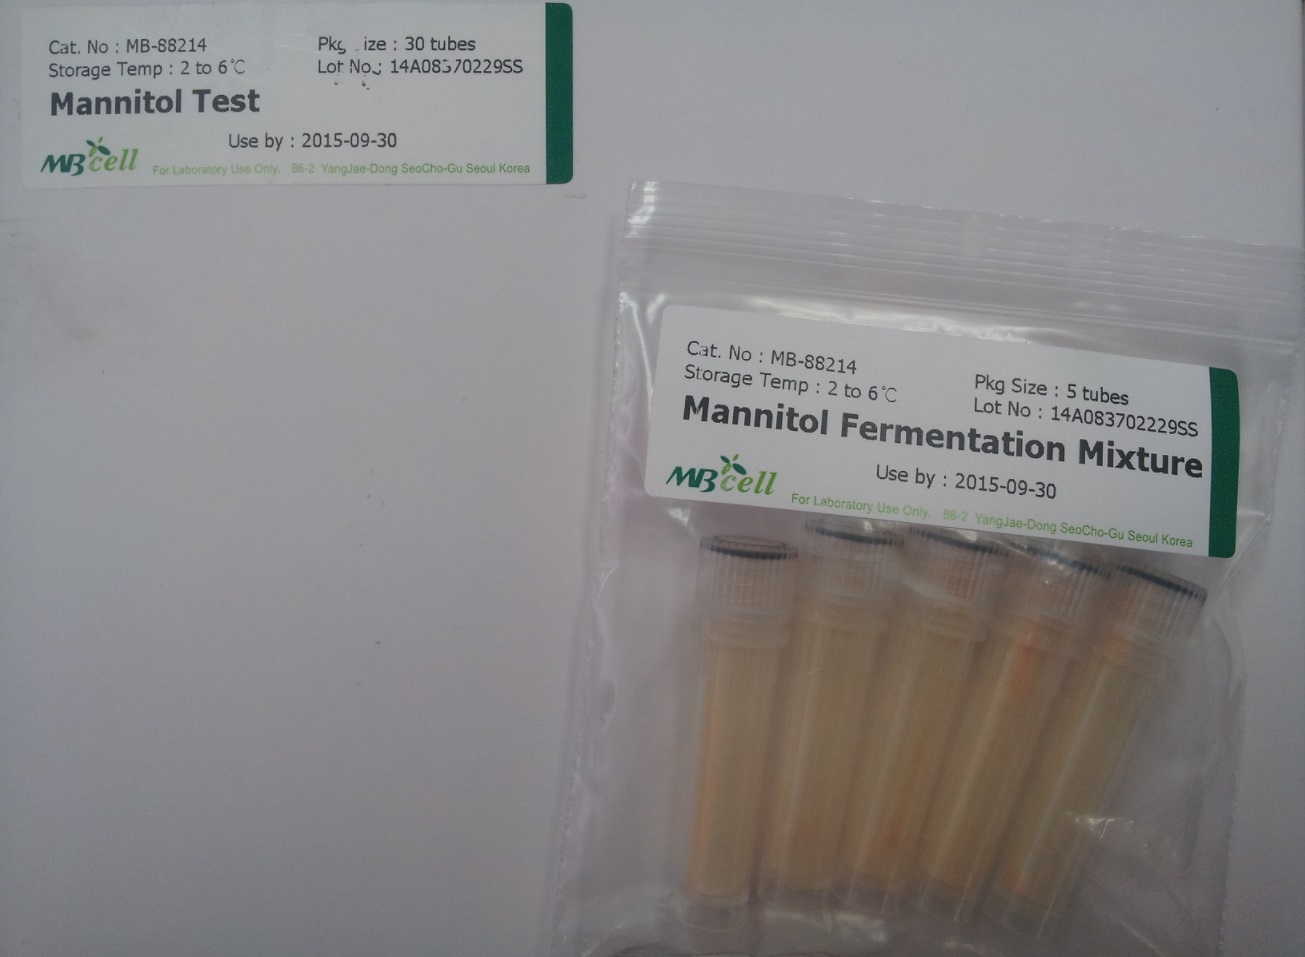 Ornithine Decarboxylase Test